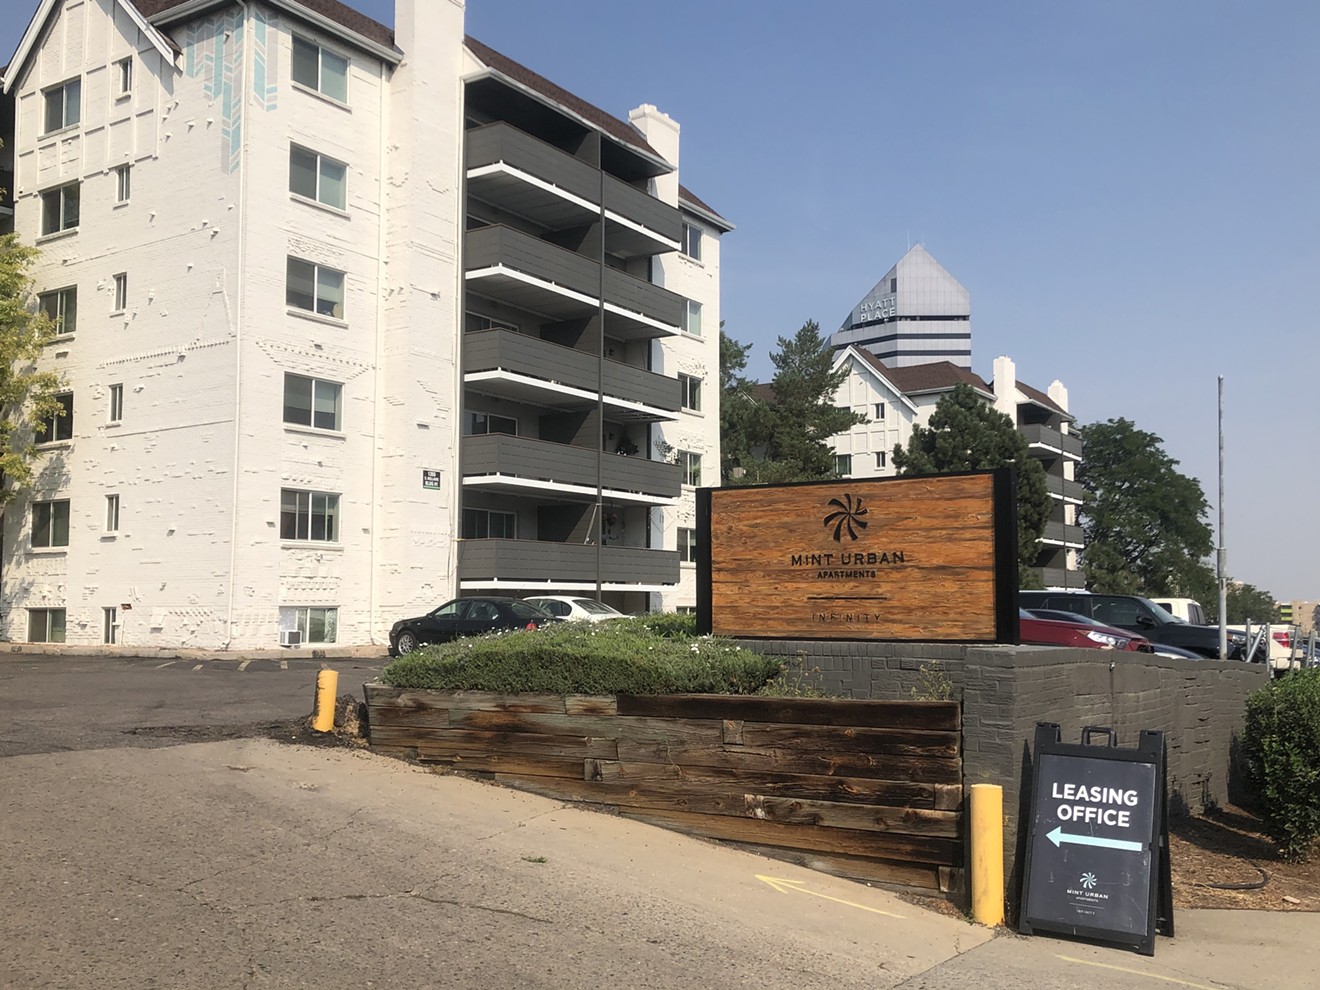 Tenants at the Mint Urban Infinity apartment complex on 1261 South Bellaire Street have filed a class action lawsuit after months of being ignored.